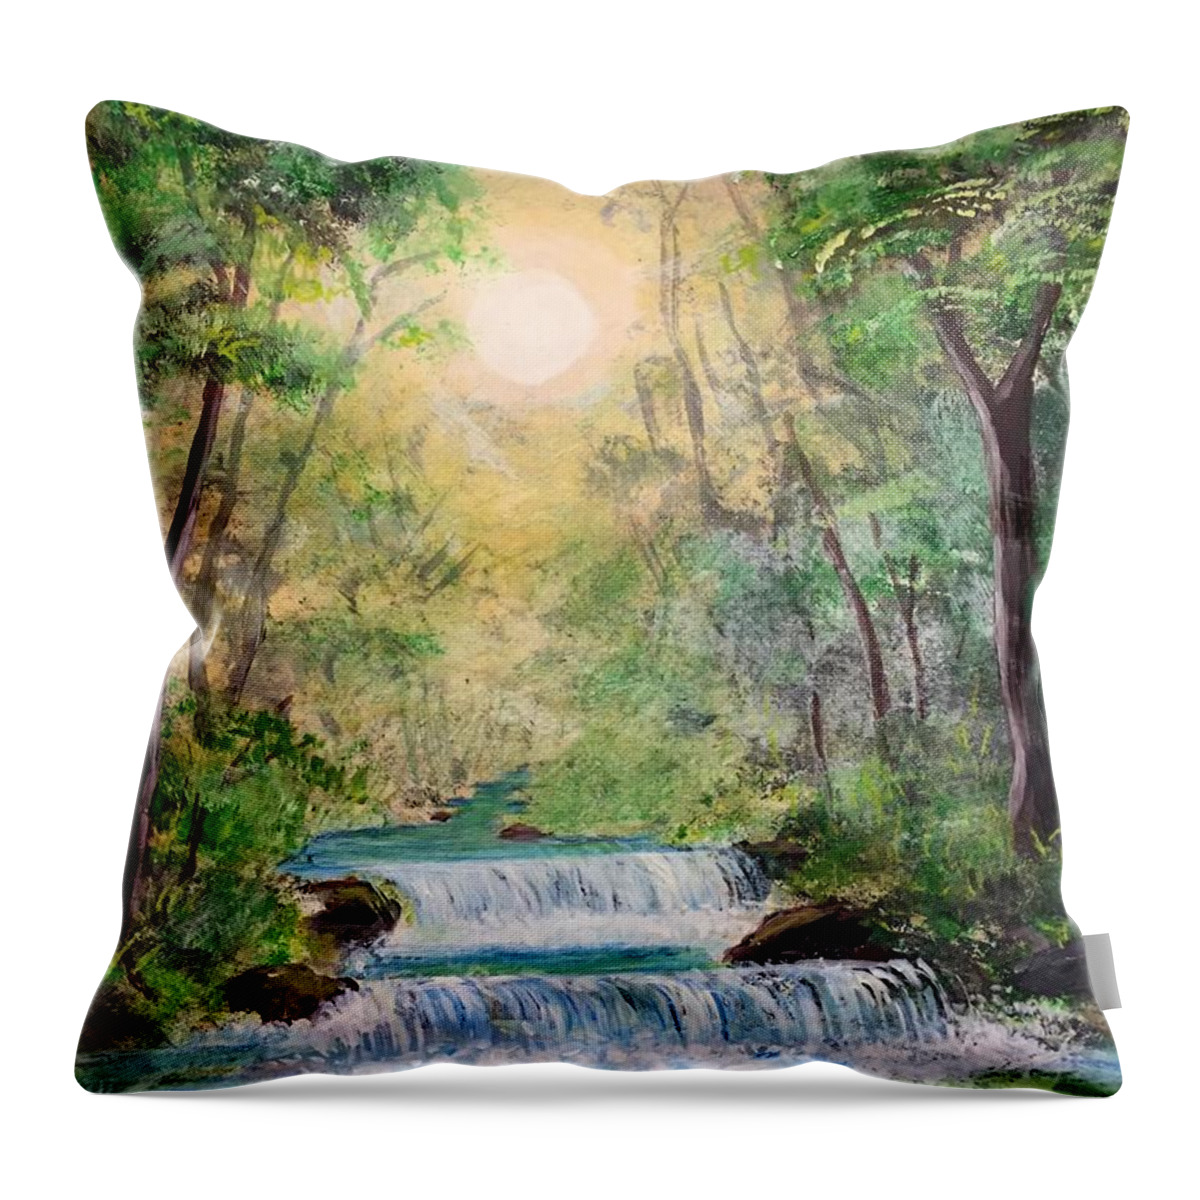 Late Eveninng Sunset In The Forrest Throw Pillow featuring the painting Brook Side by Ronnie Egerton